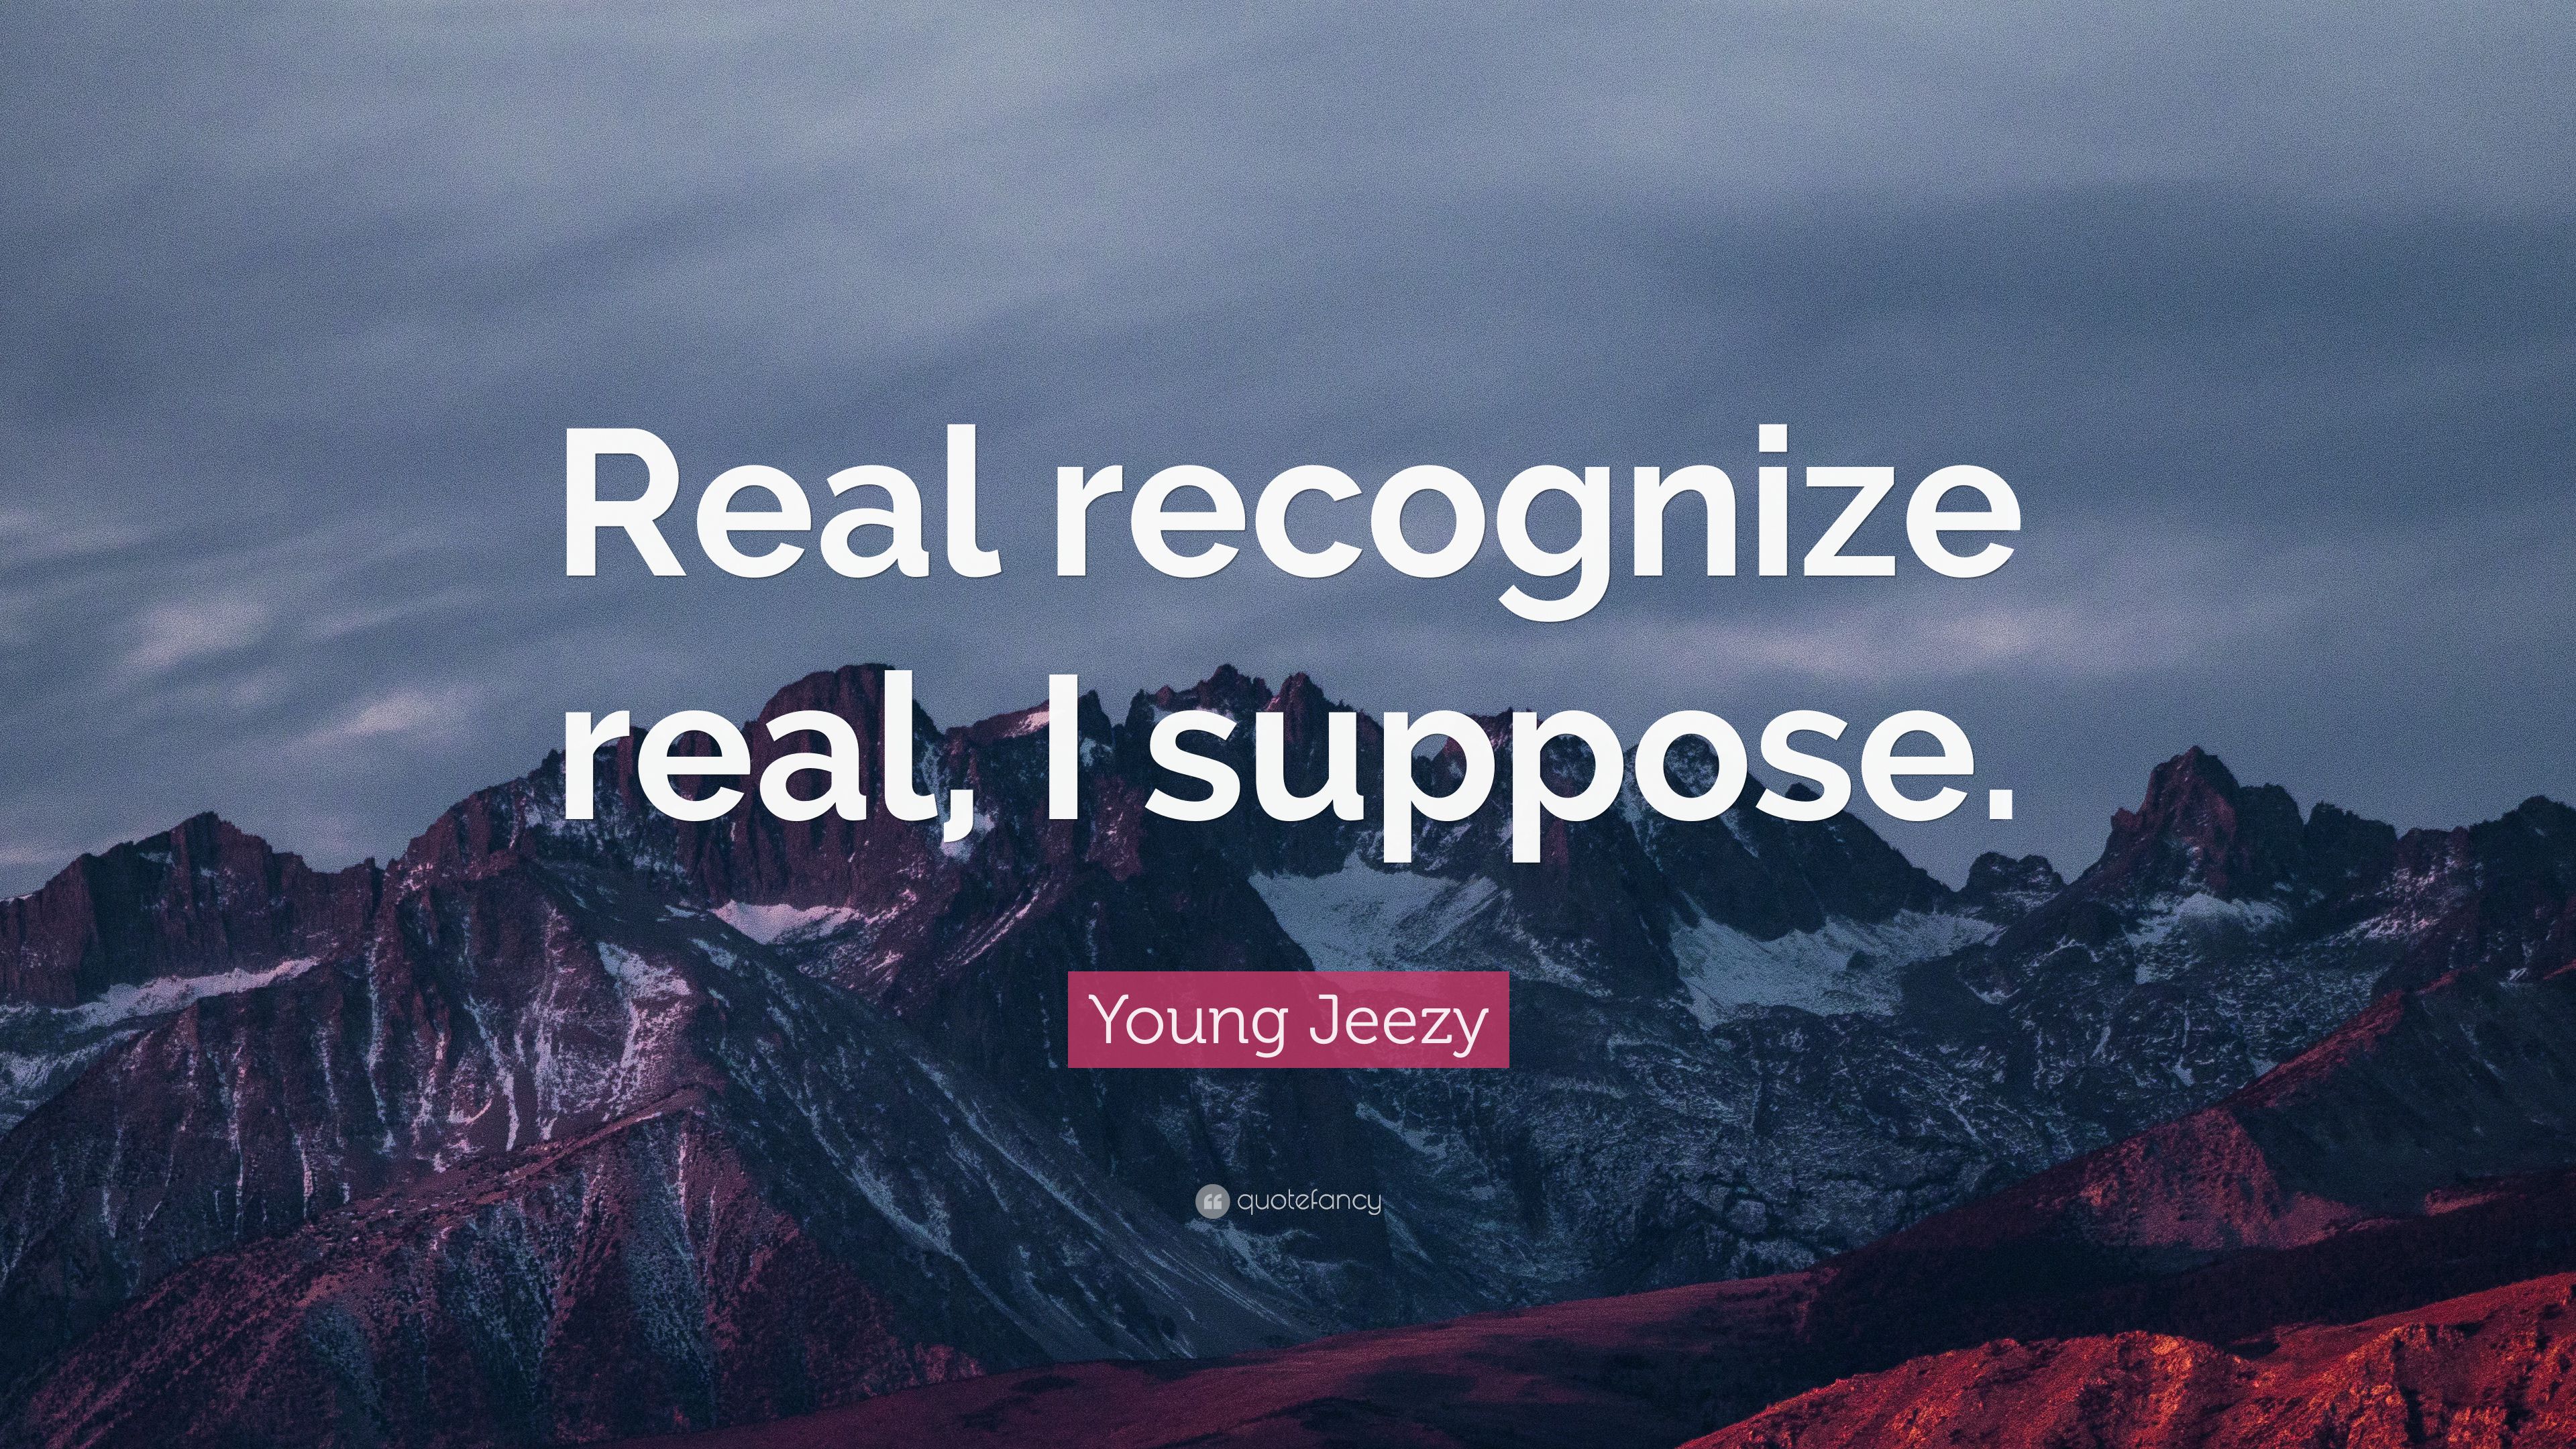 Young Jeezy Quote: “Real recognize real, I suppose.” 7 wallpaper